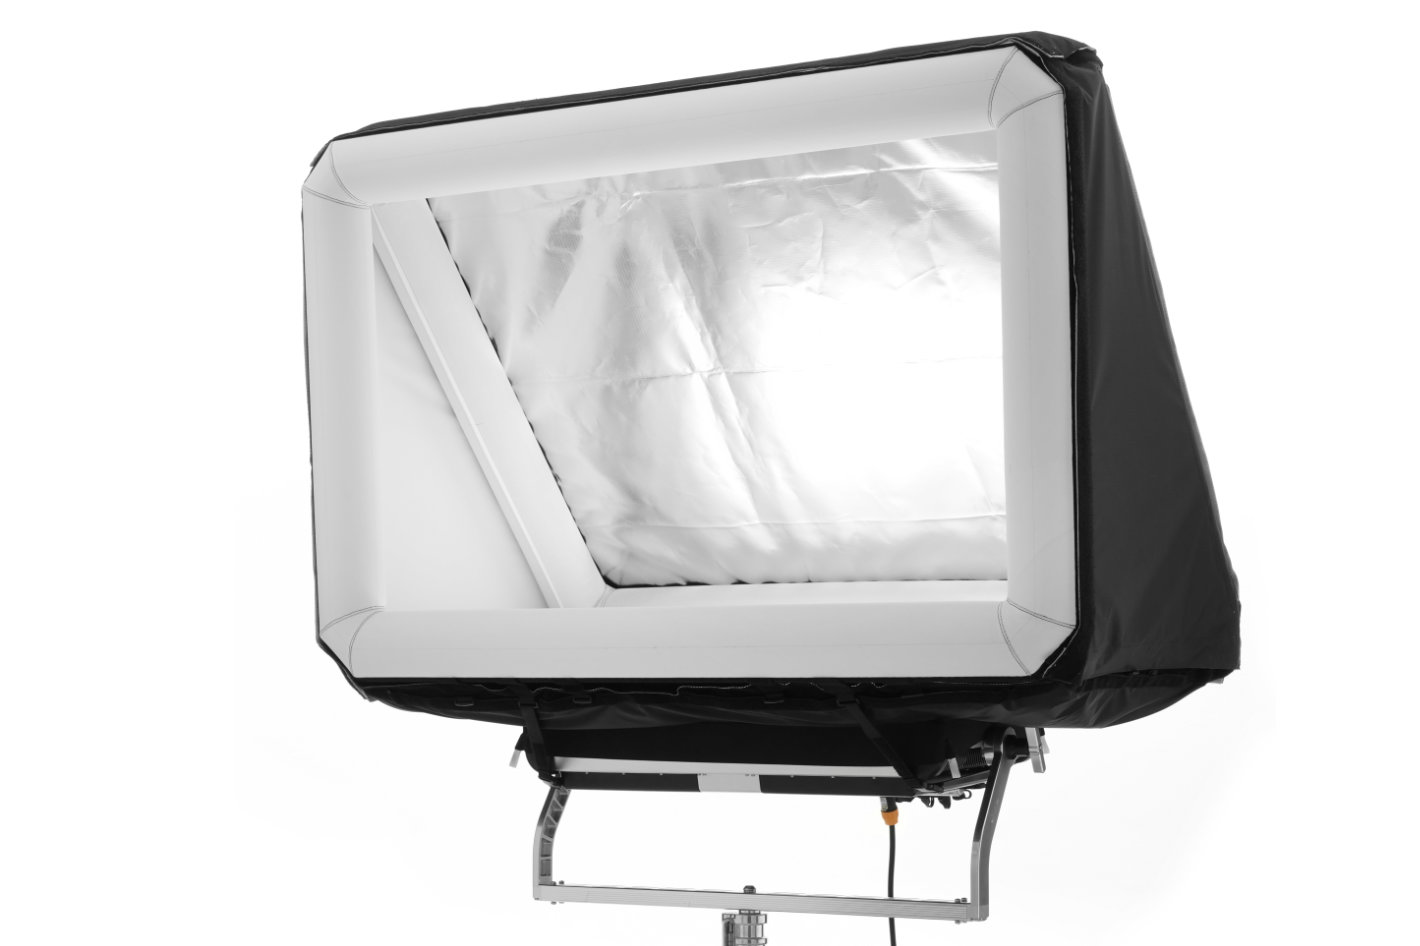 SNAPBAG AIRGLOW, an inflatable light control solution